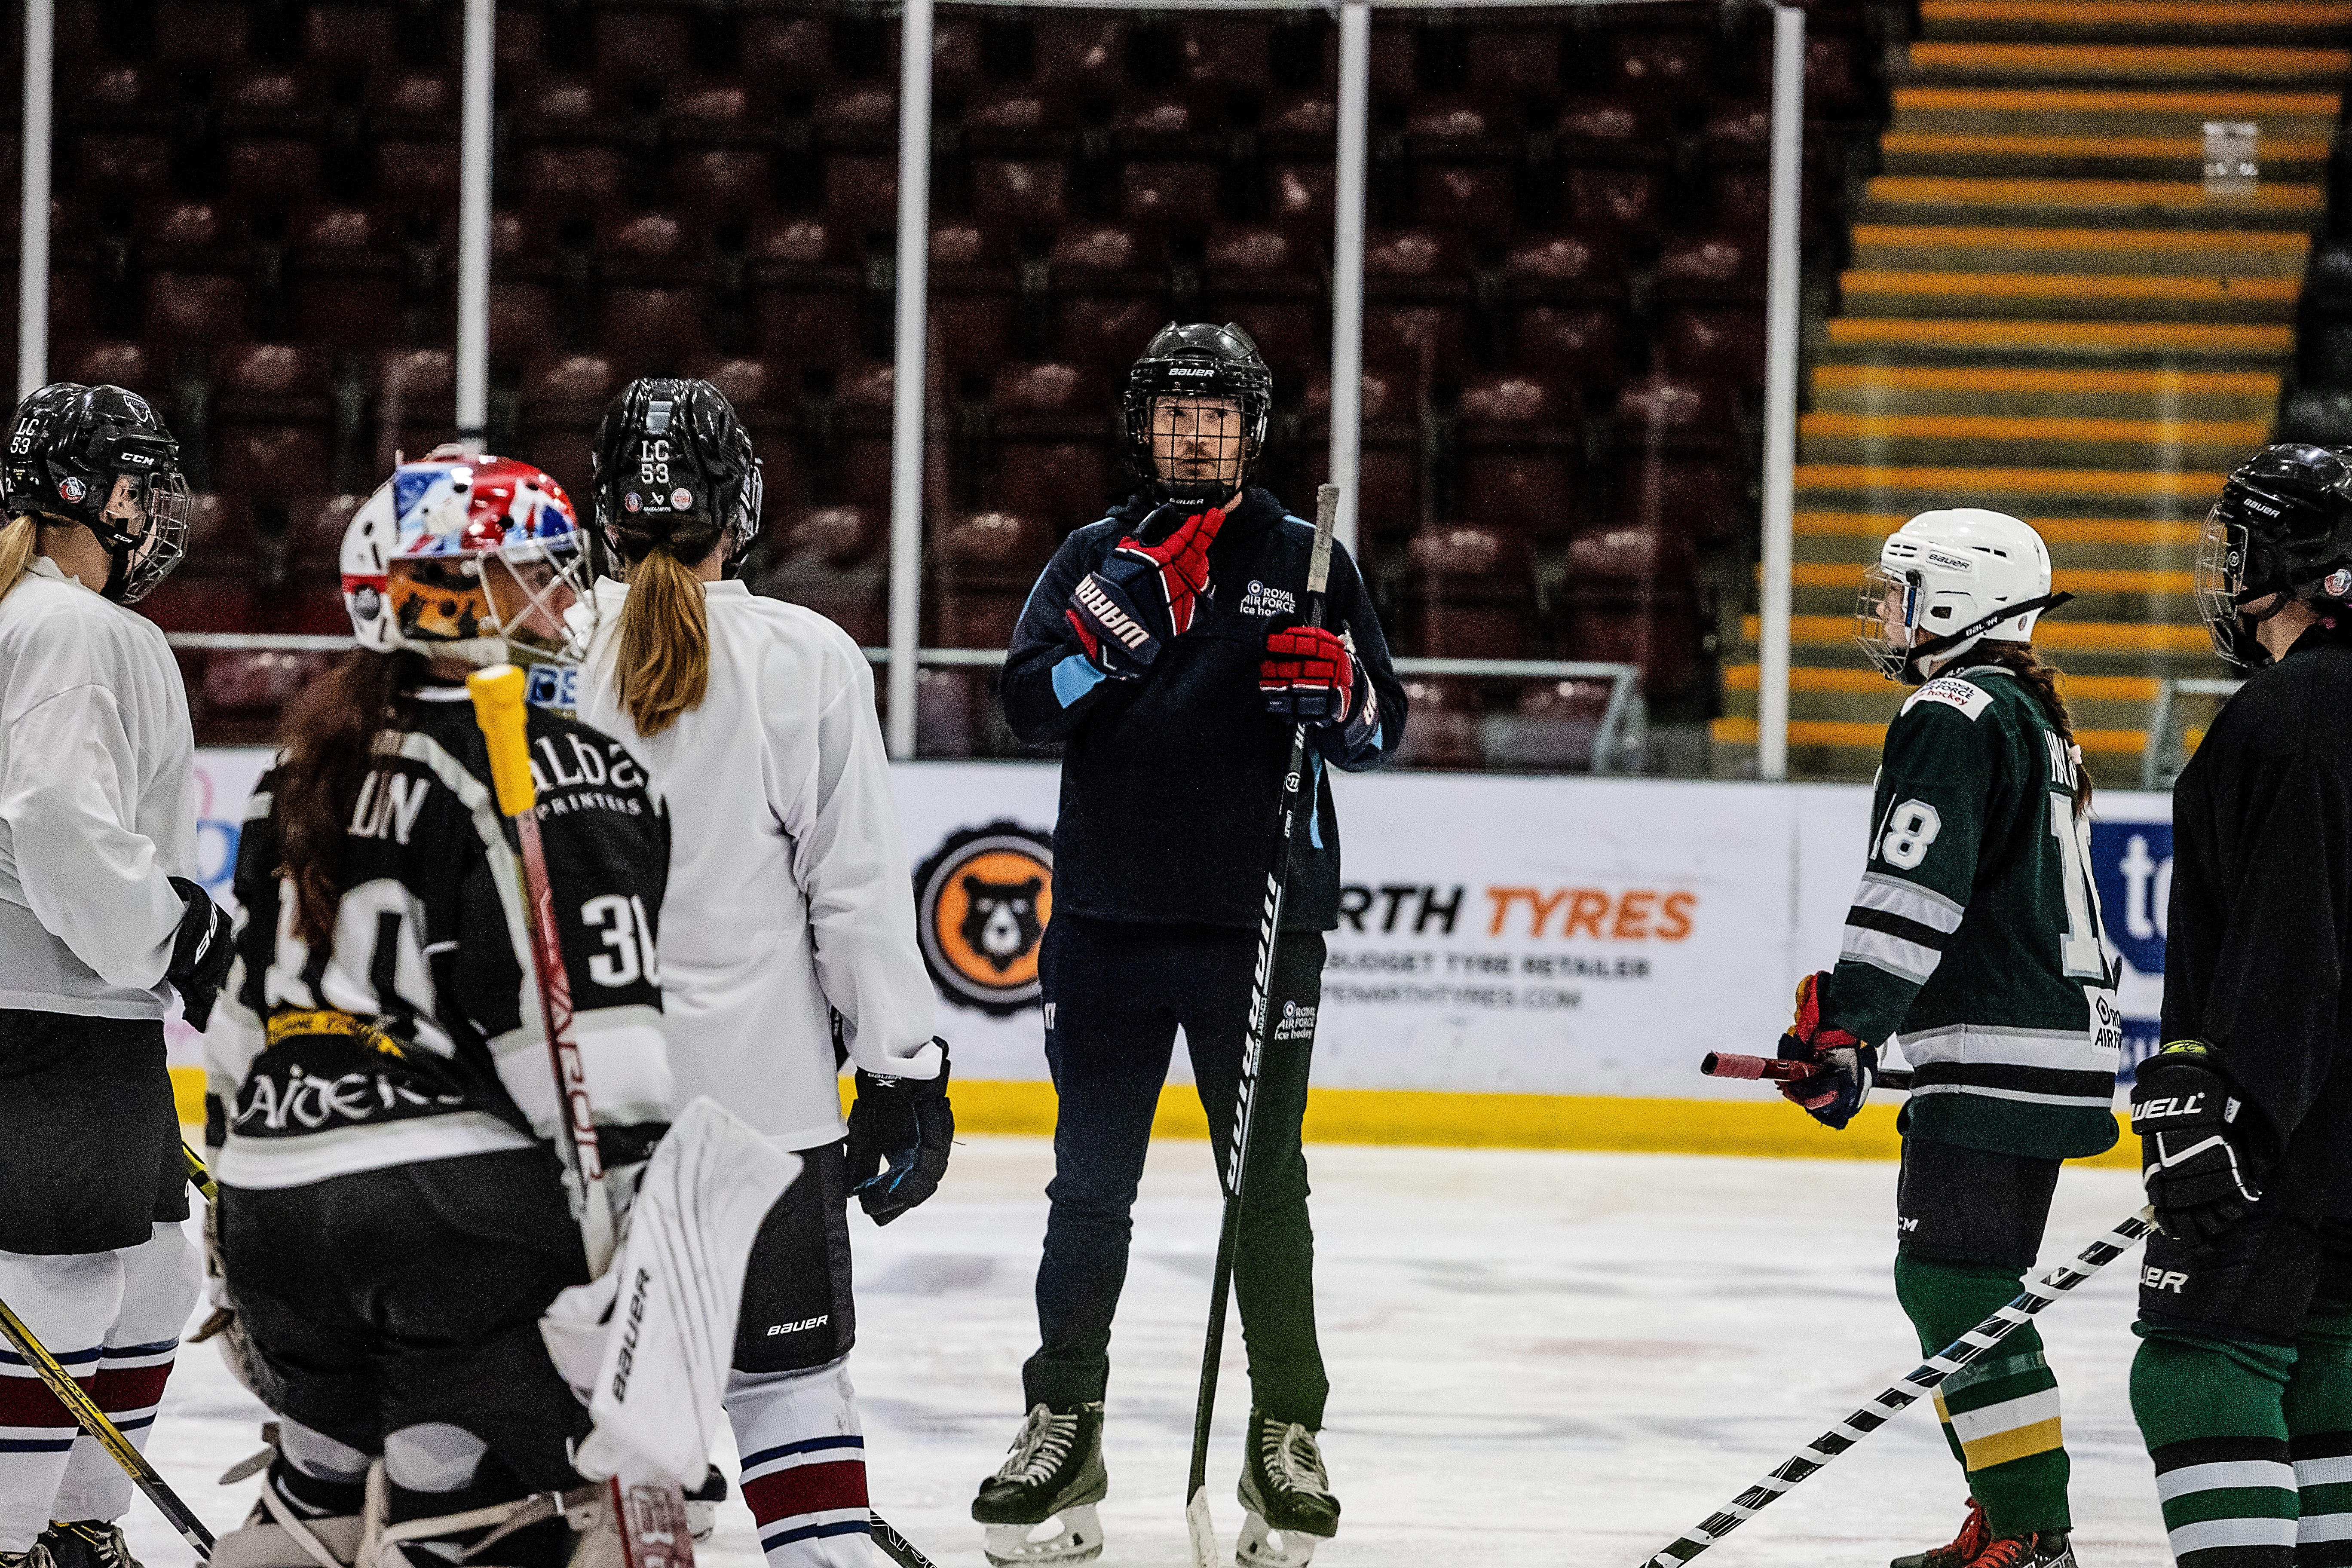 Corporal Young coaching the team on the ice - Photo credit: Trish Thompson Photography